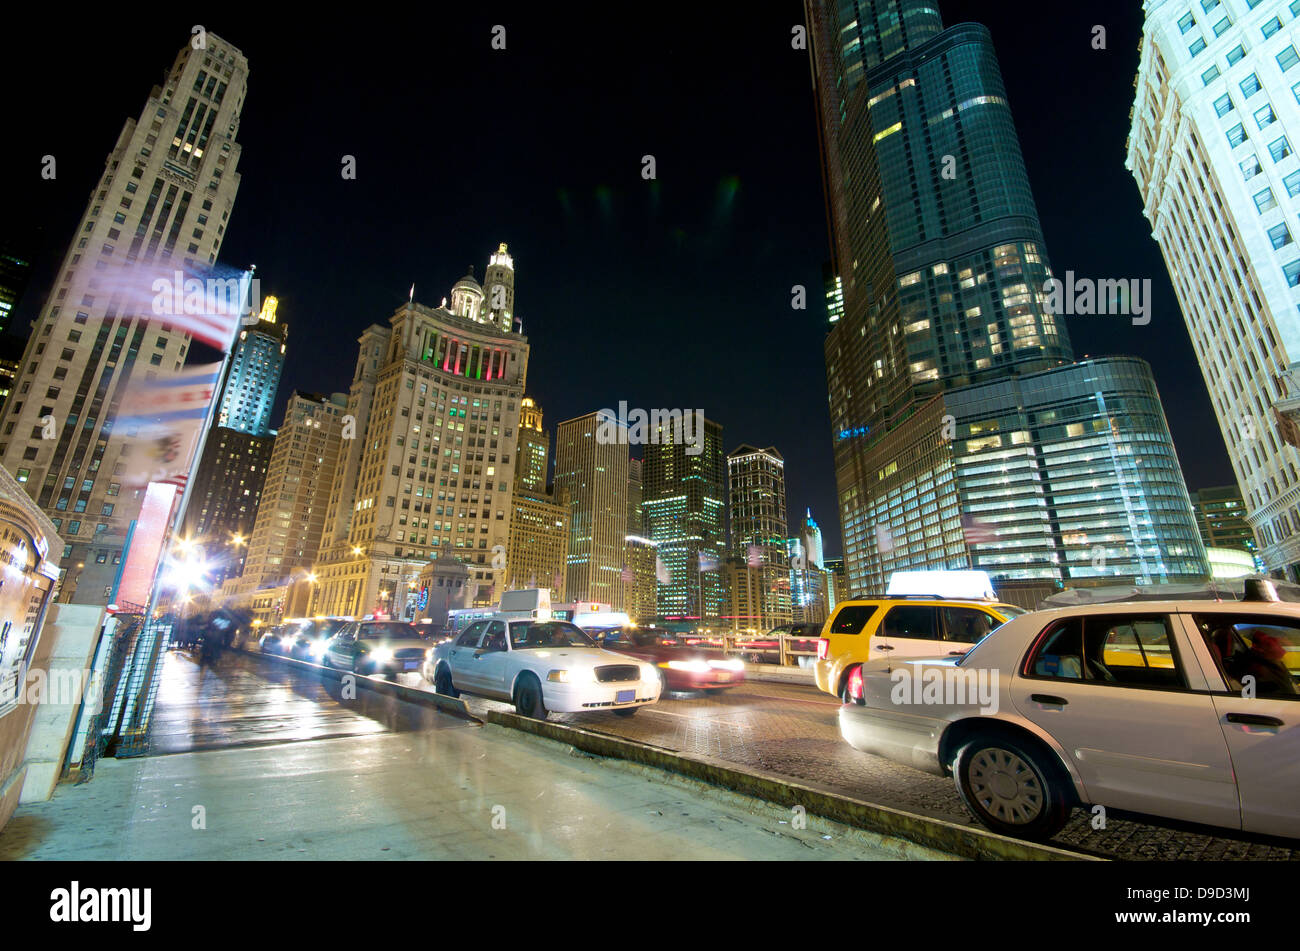 Evening Traffic on Michigan Avenue at the Chicago River. City life. Stock Photo